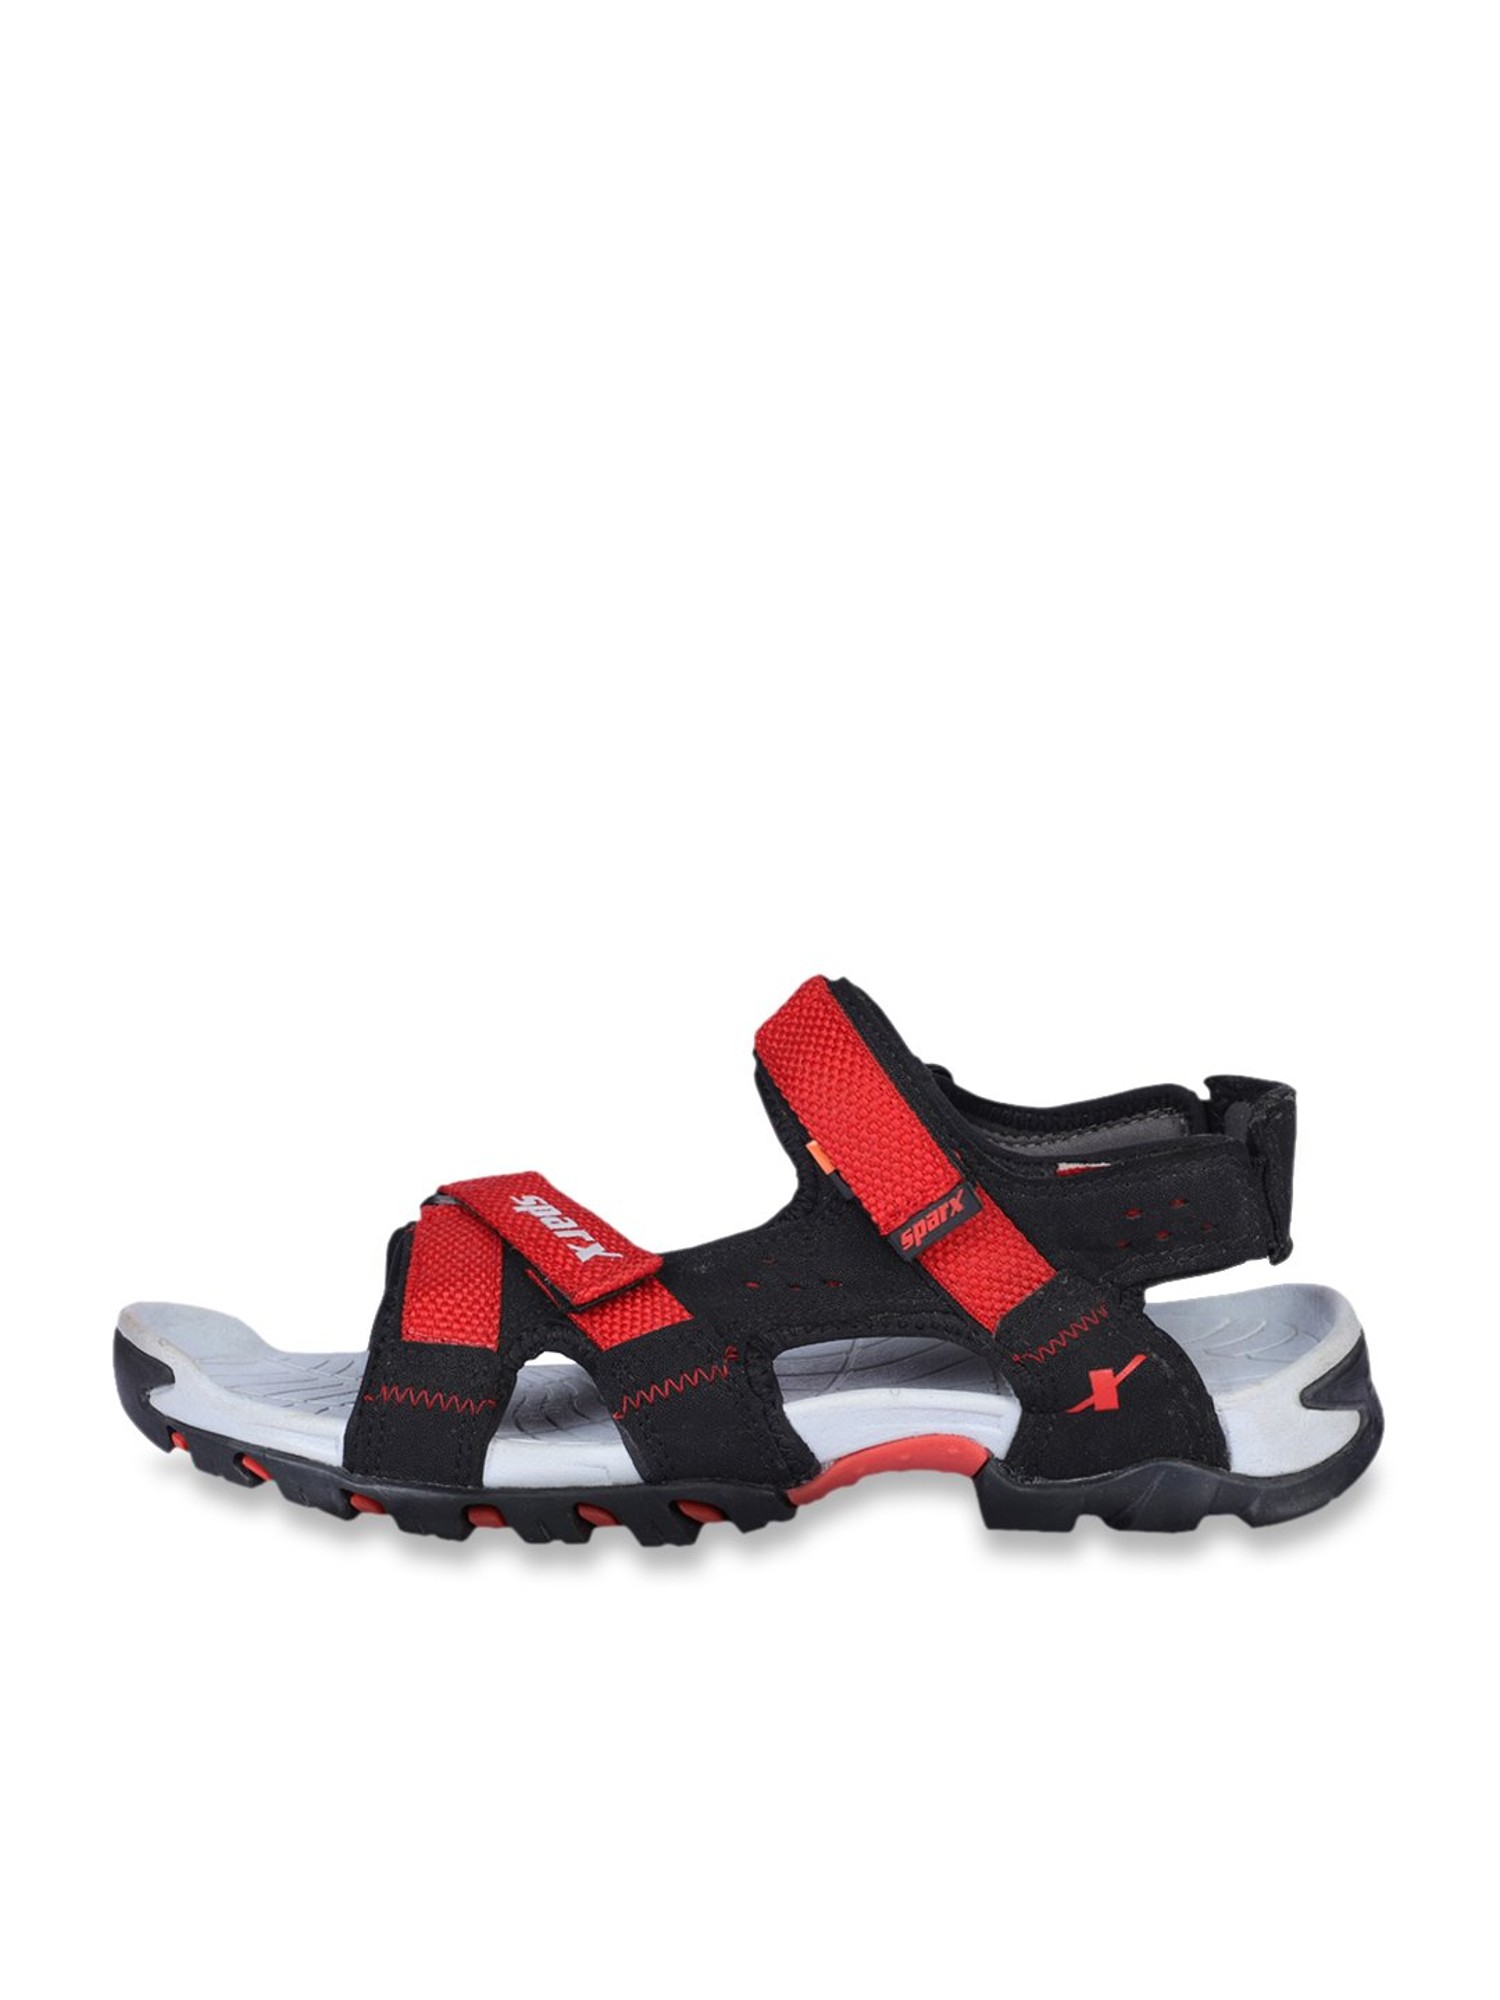 Liberty Red Floater Sandals - Buy Liberty Red Floater Sandals Online at  Best Prices in India on Snapdeal